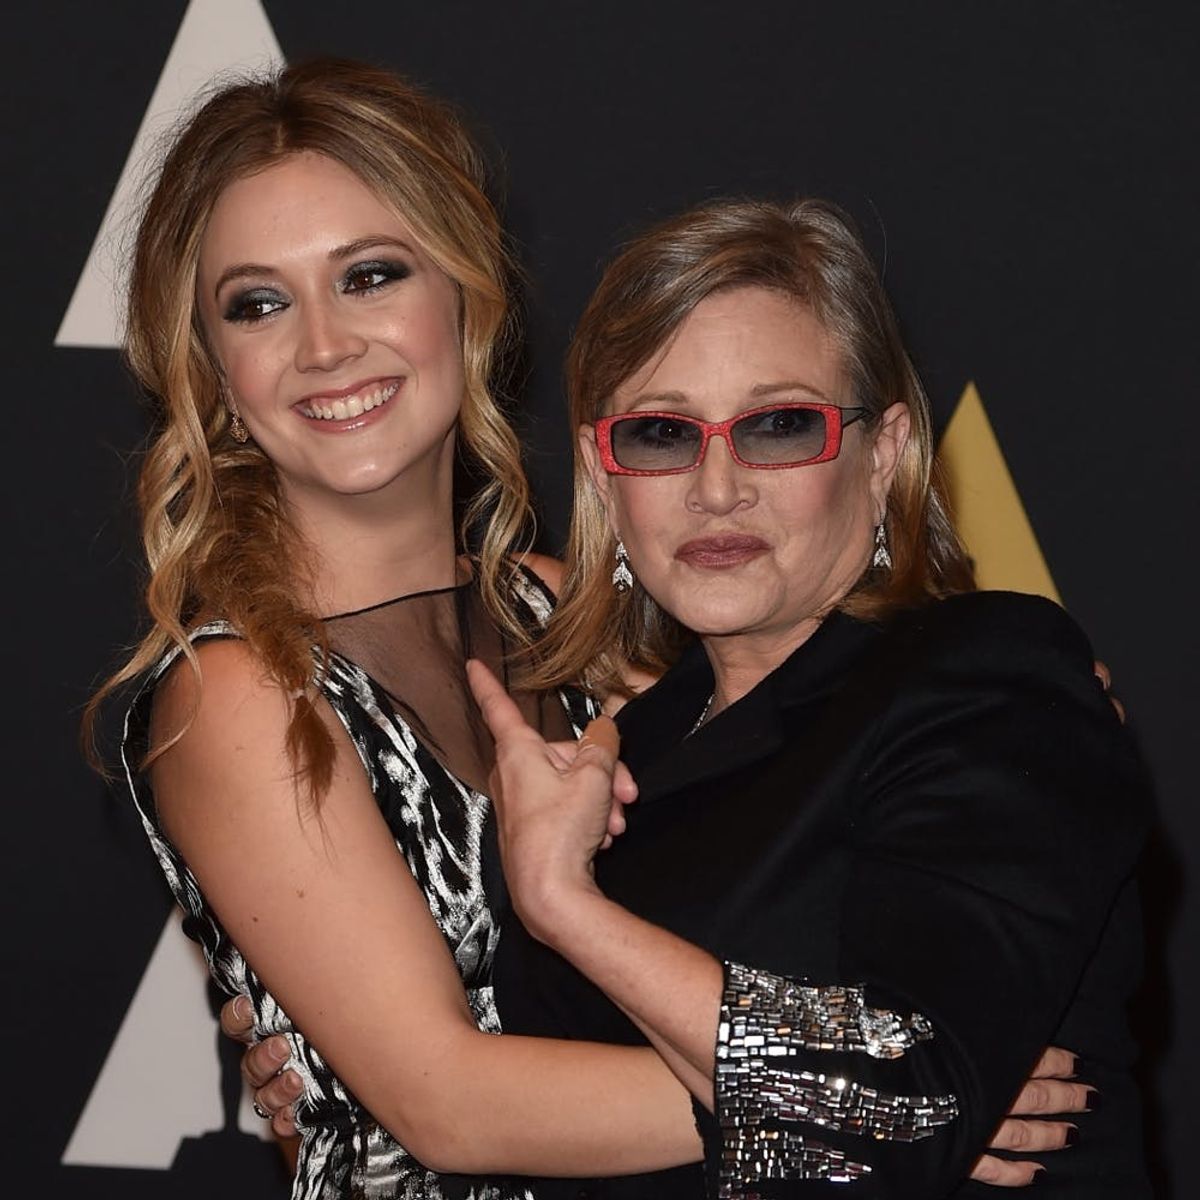 Billie Lourd’s Hair at the ‘Star Wars’ Premiere Was a Touching Tribute to Her Mom Carrie Fisher